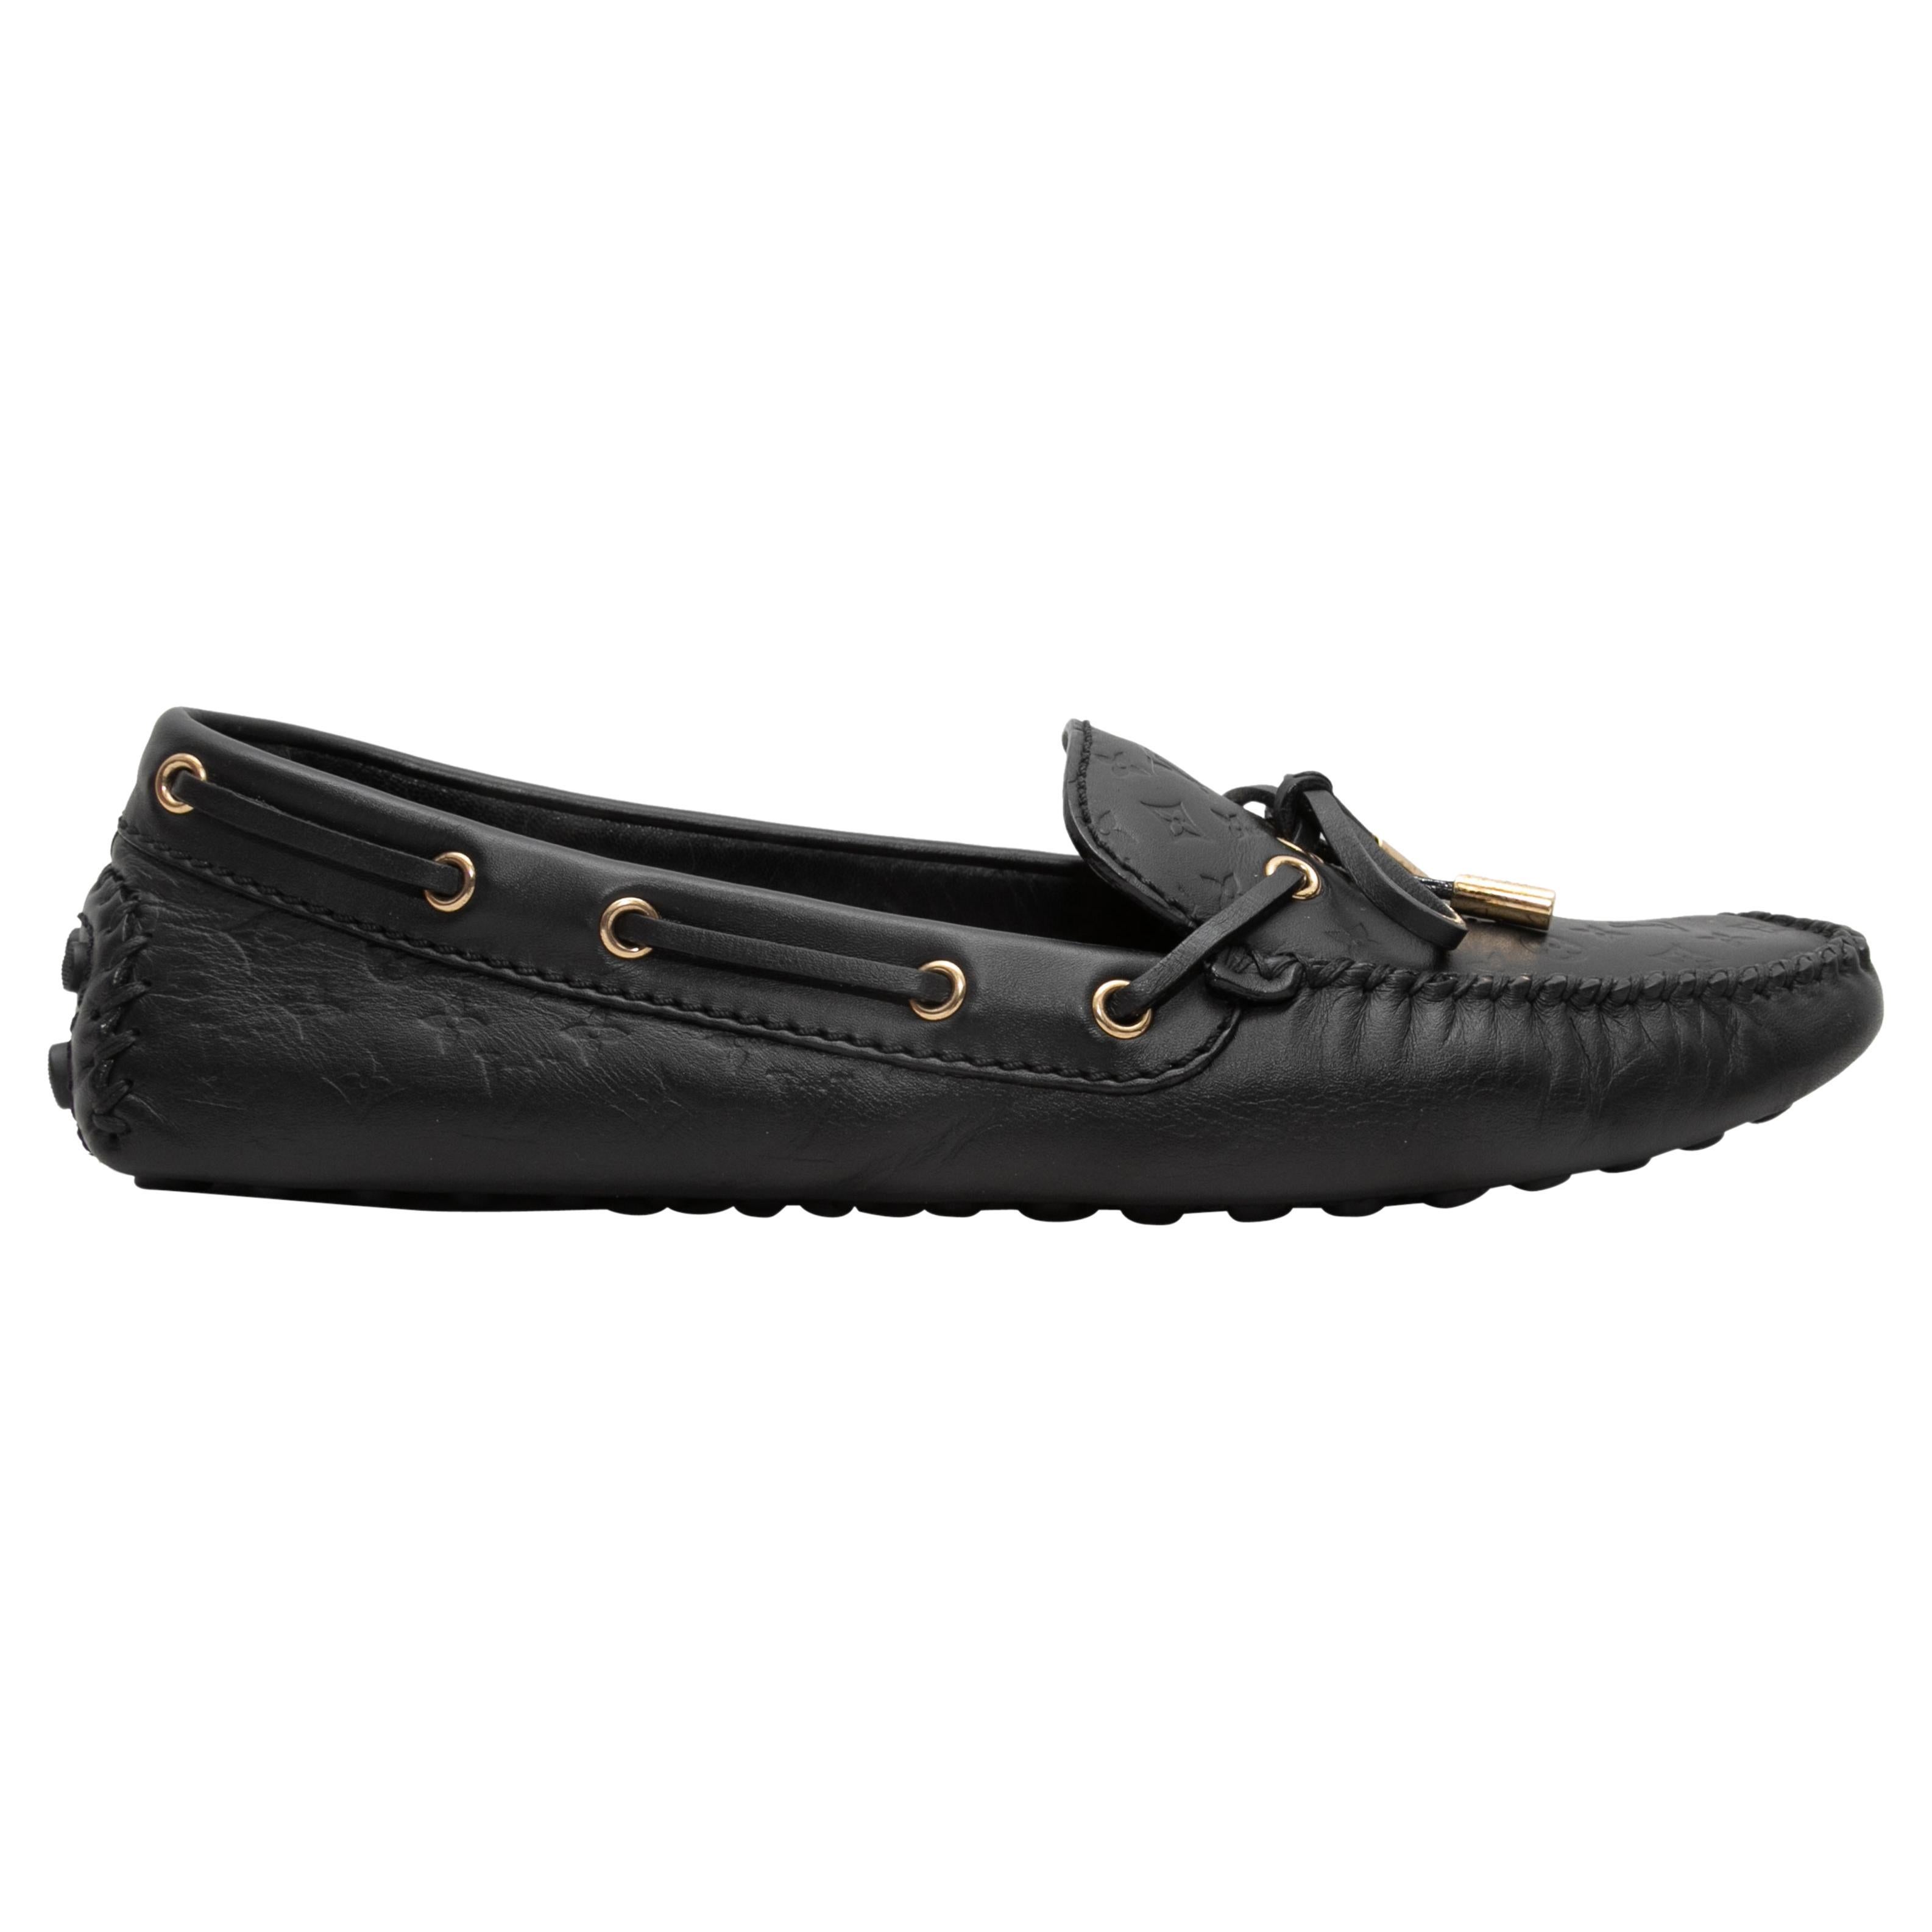 Black Louis Vuitton Embossed Monogrammed Driving Loafers Size 39 For Sale